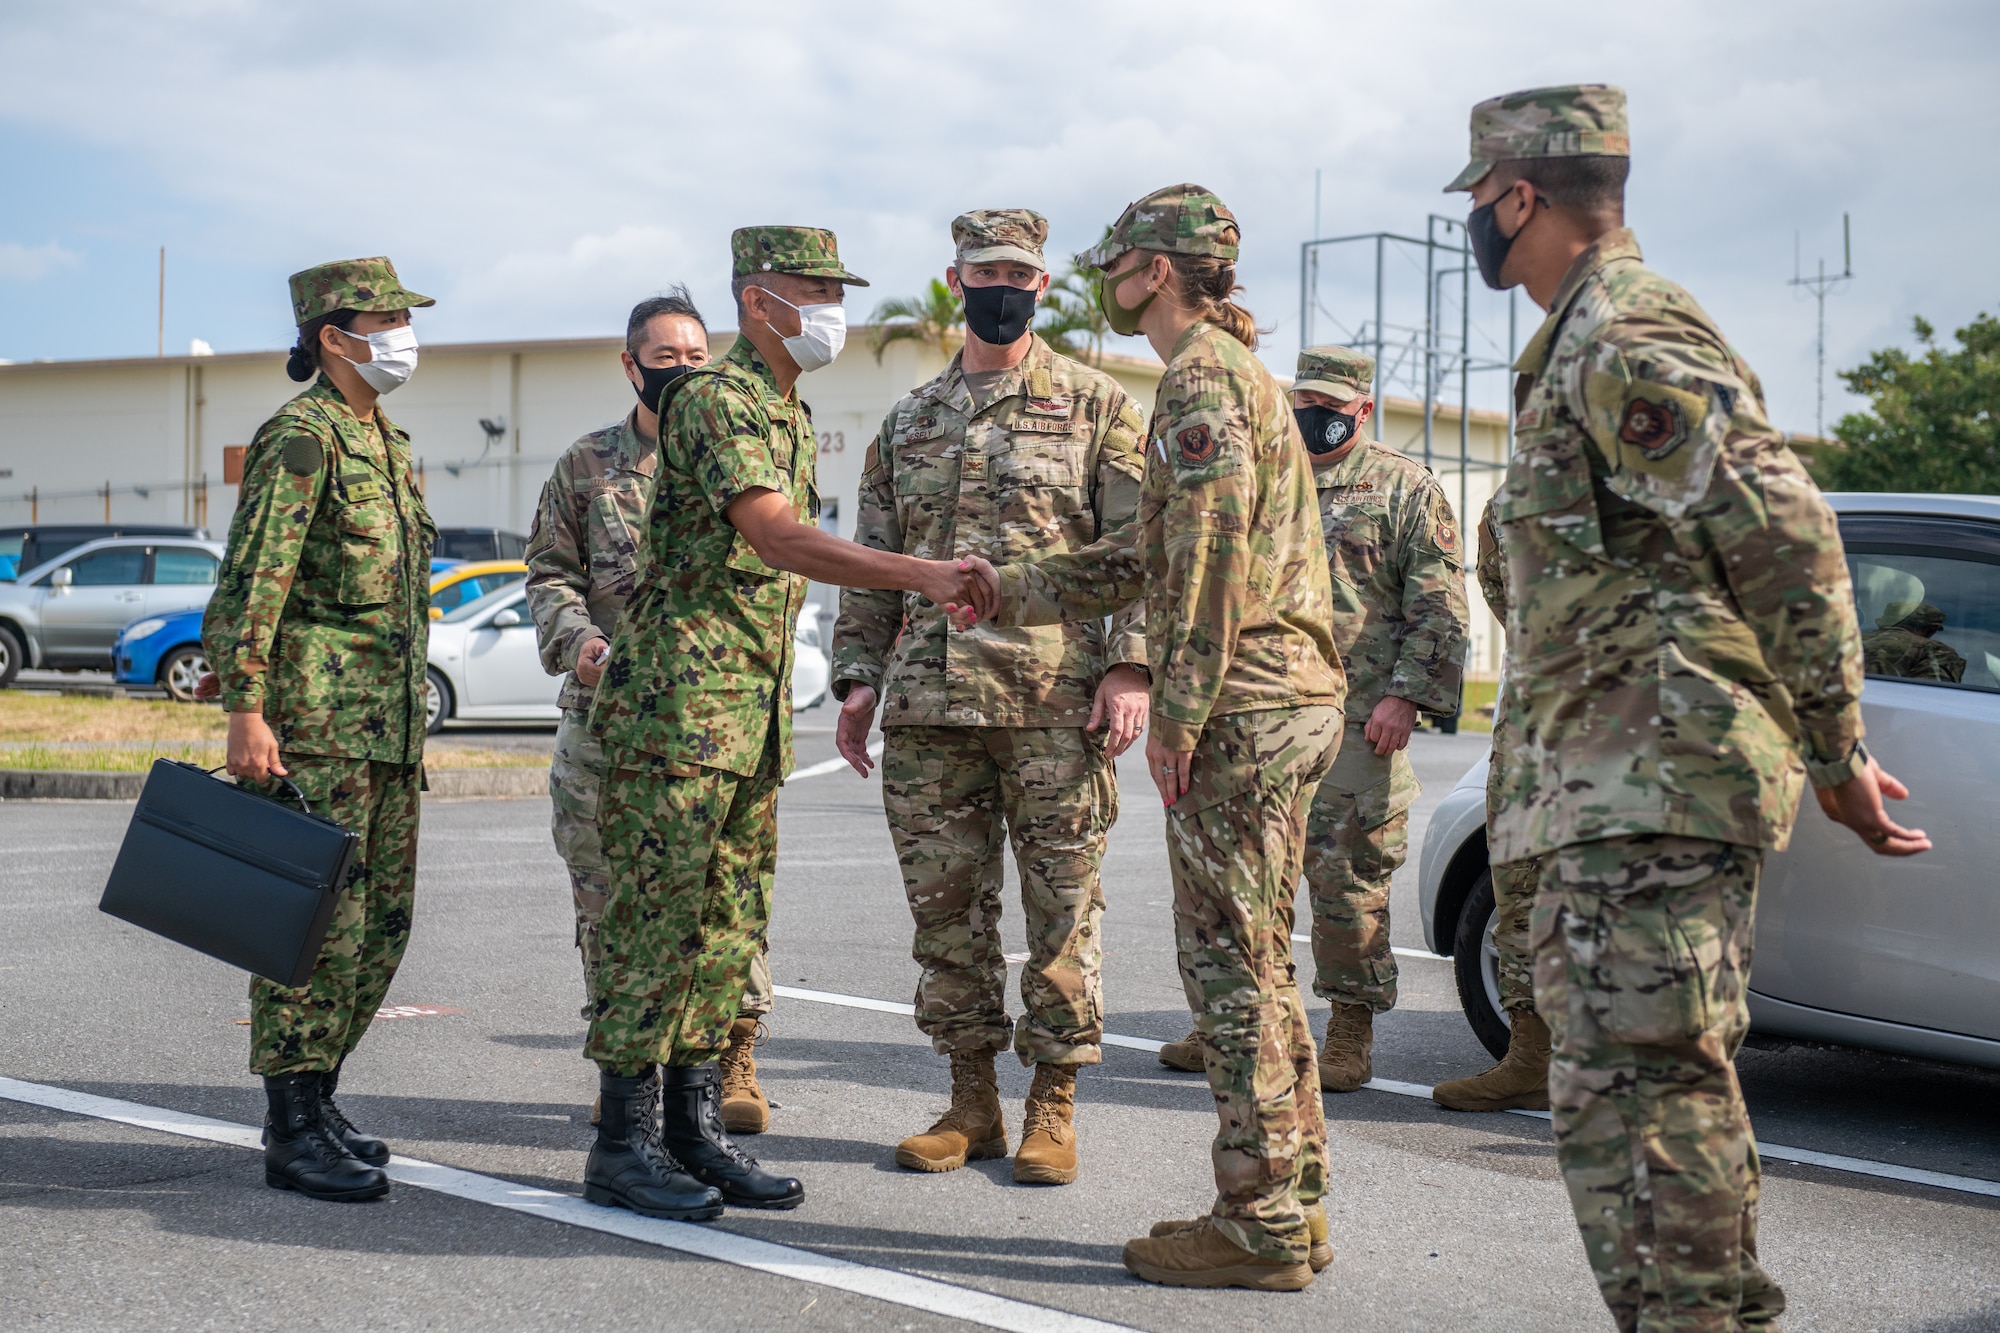 A group of military members stand around a Japanese military member shaking hands with an American military member